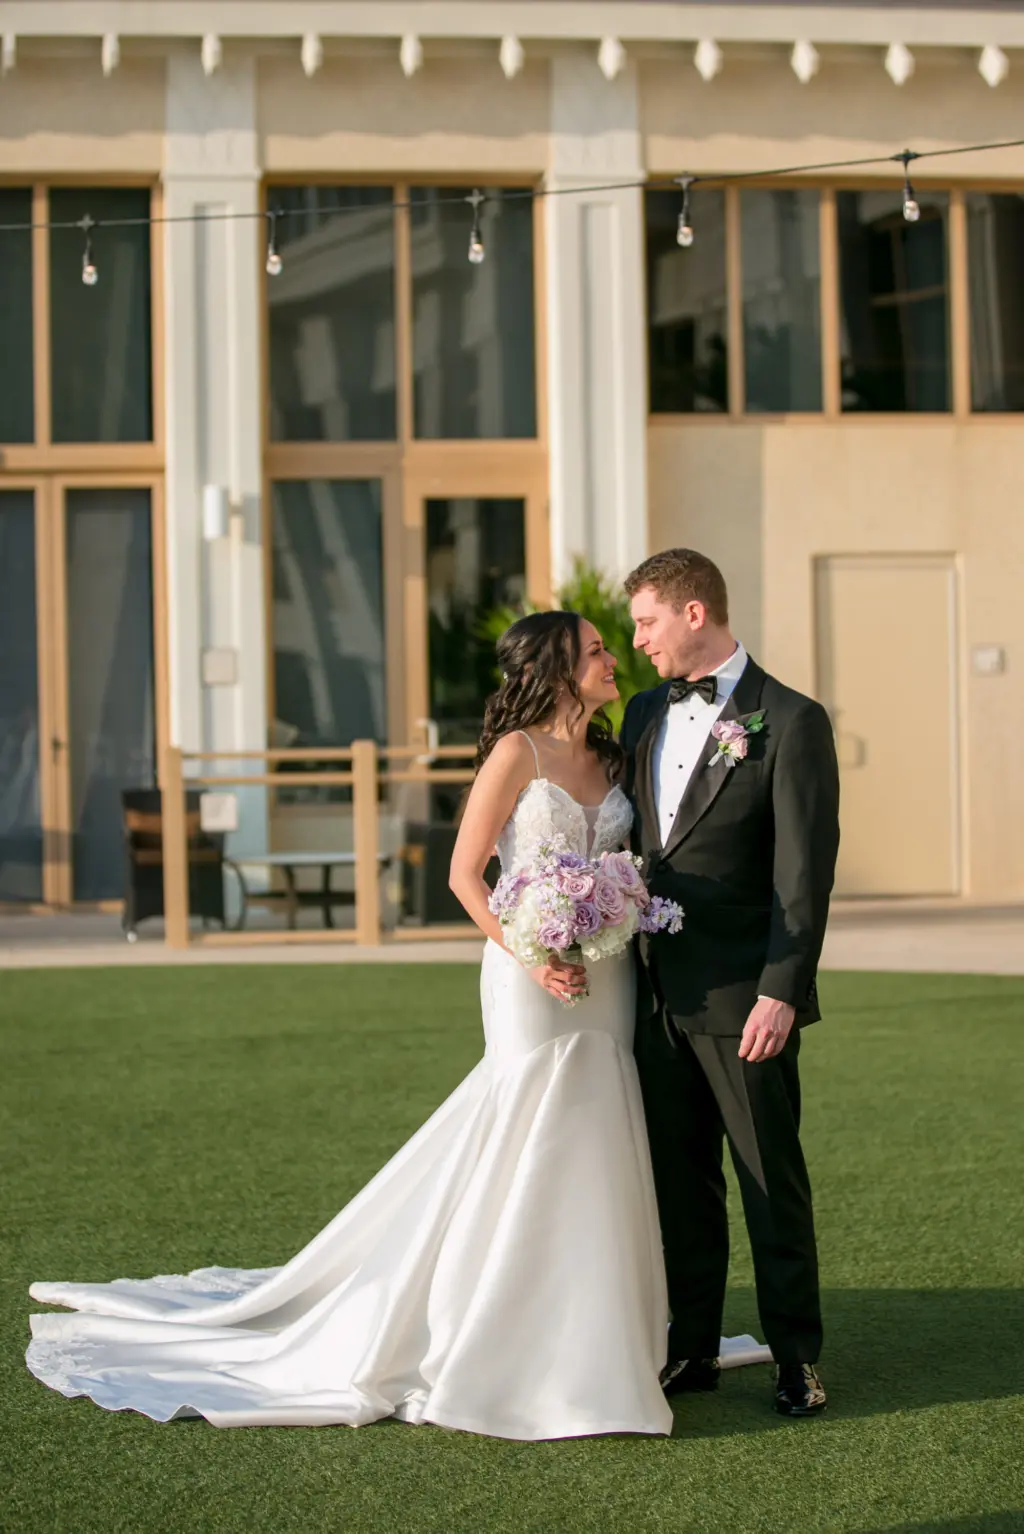 Bride and Groom First Look Wedding Portrait | Tampa Bay Photographer Carrie Wildes Photography